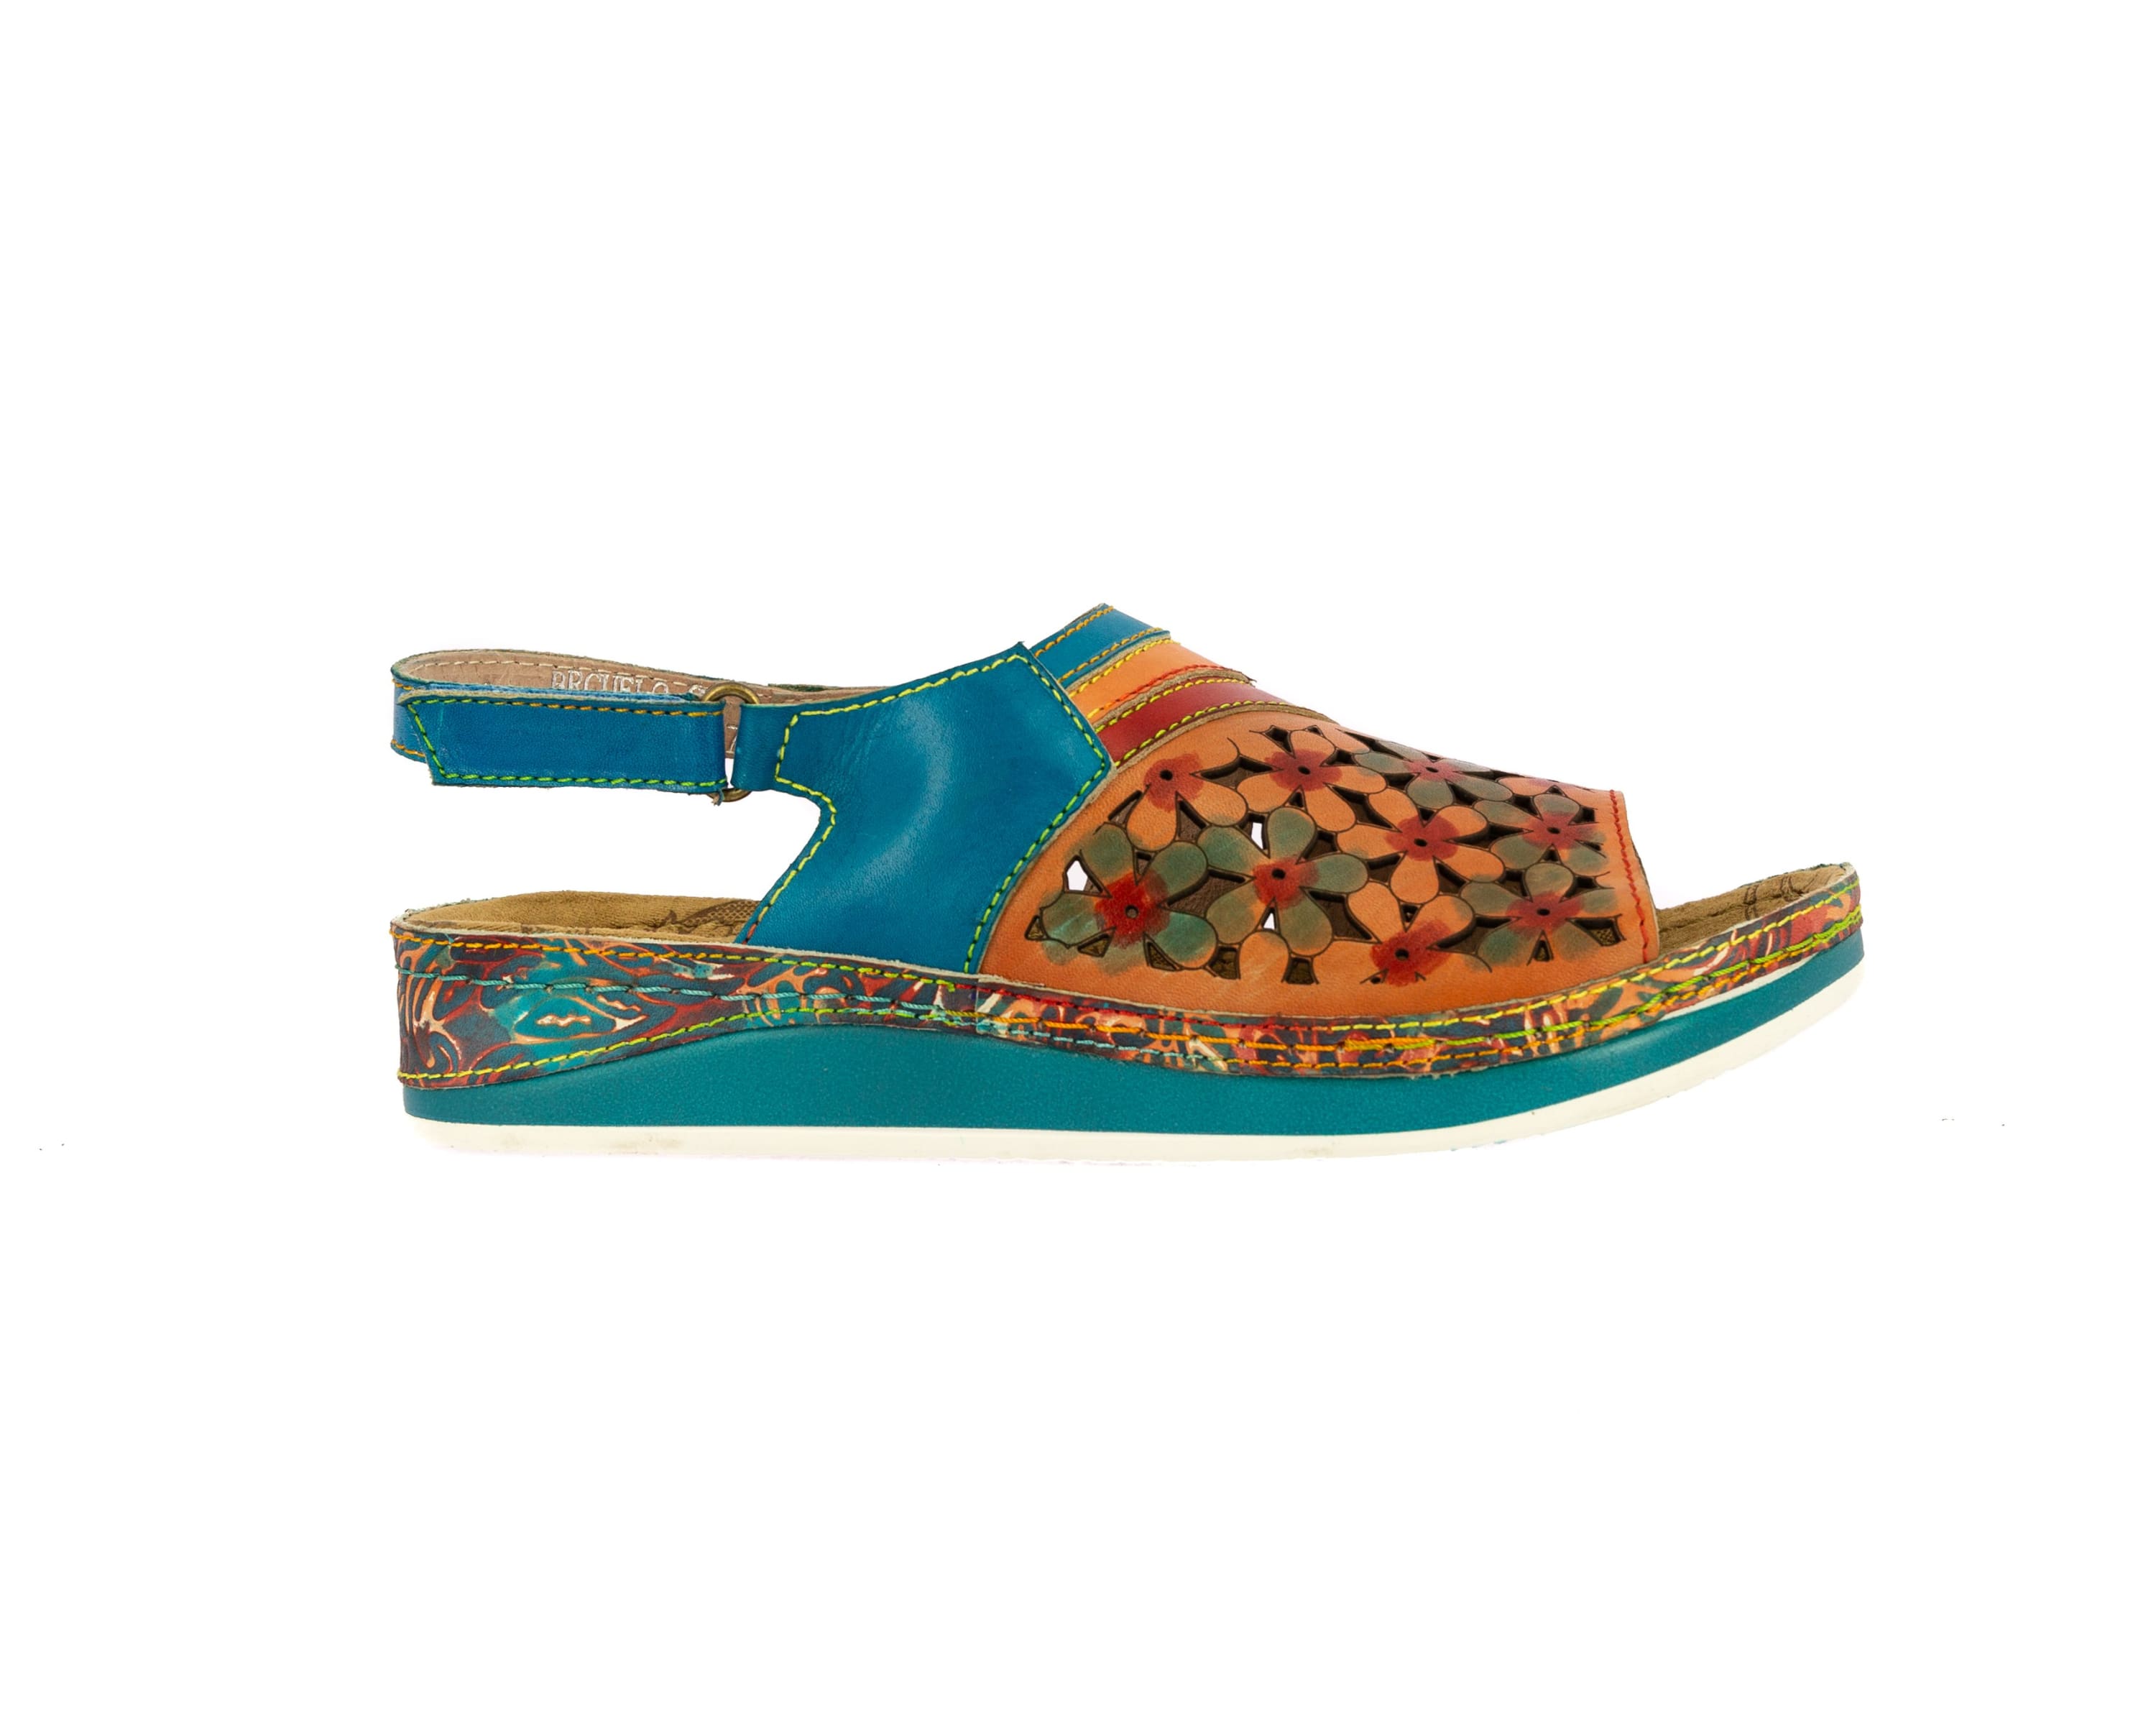 Chaussures BRCUELO 03 - 35 / TURQUOISE - Sandale